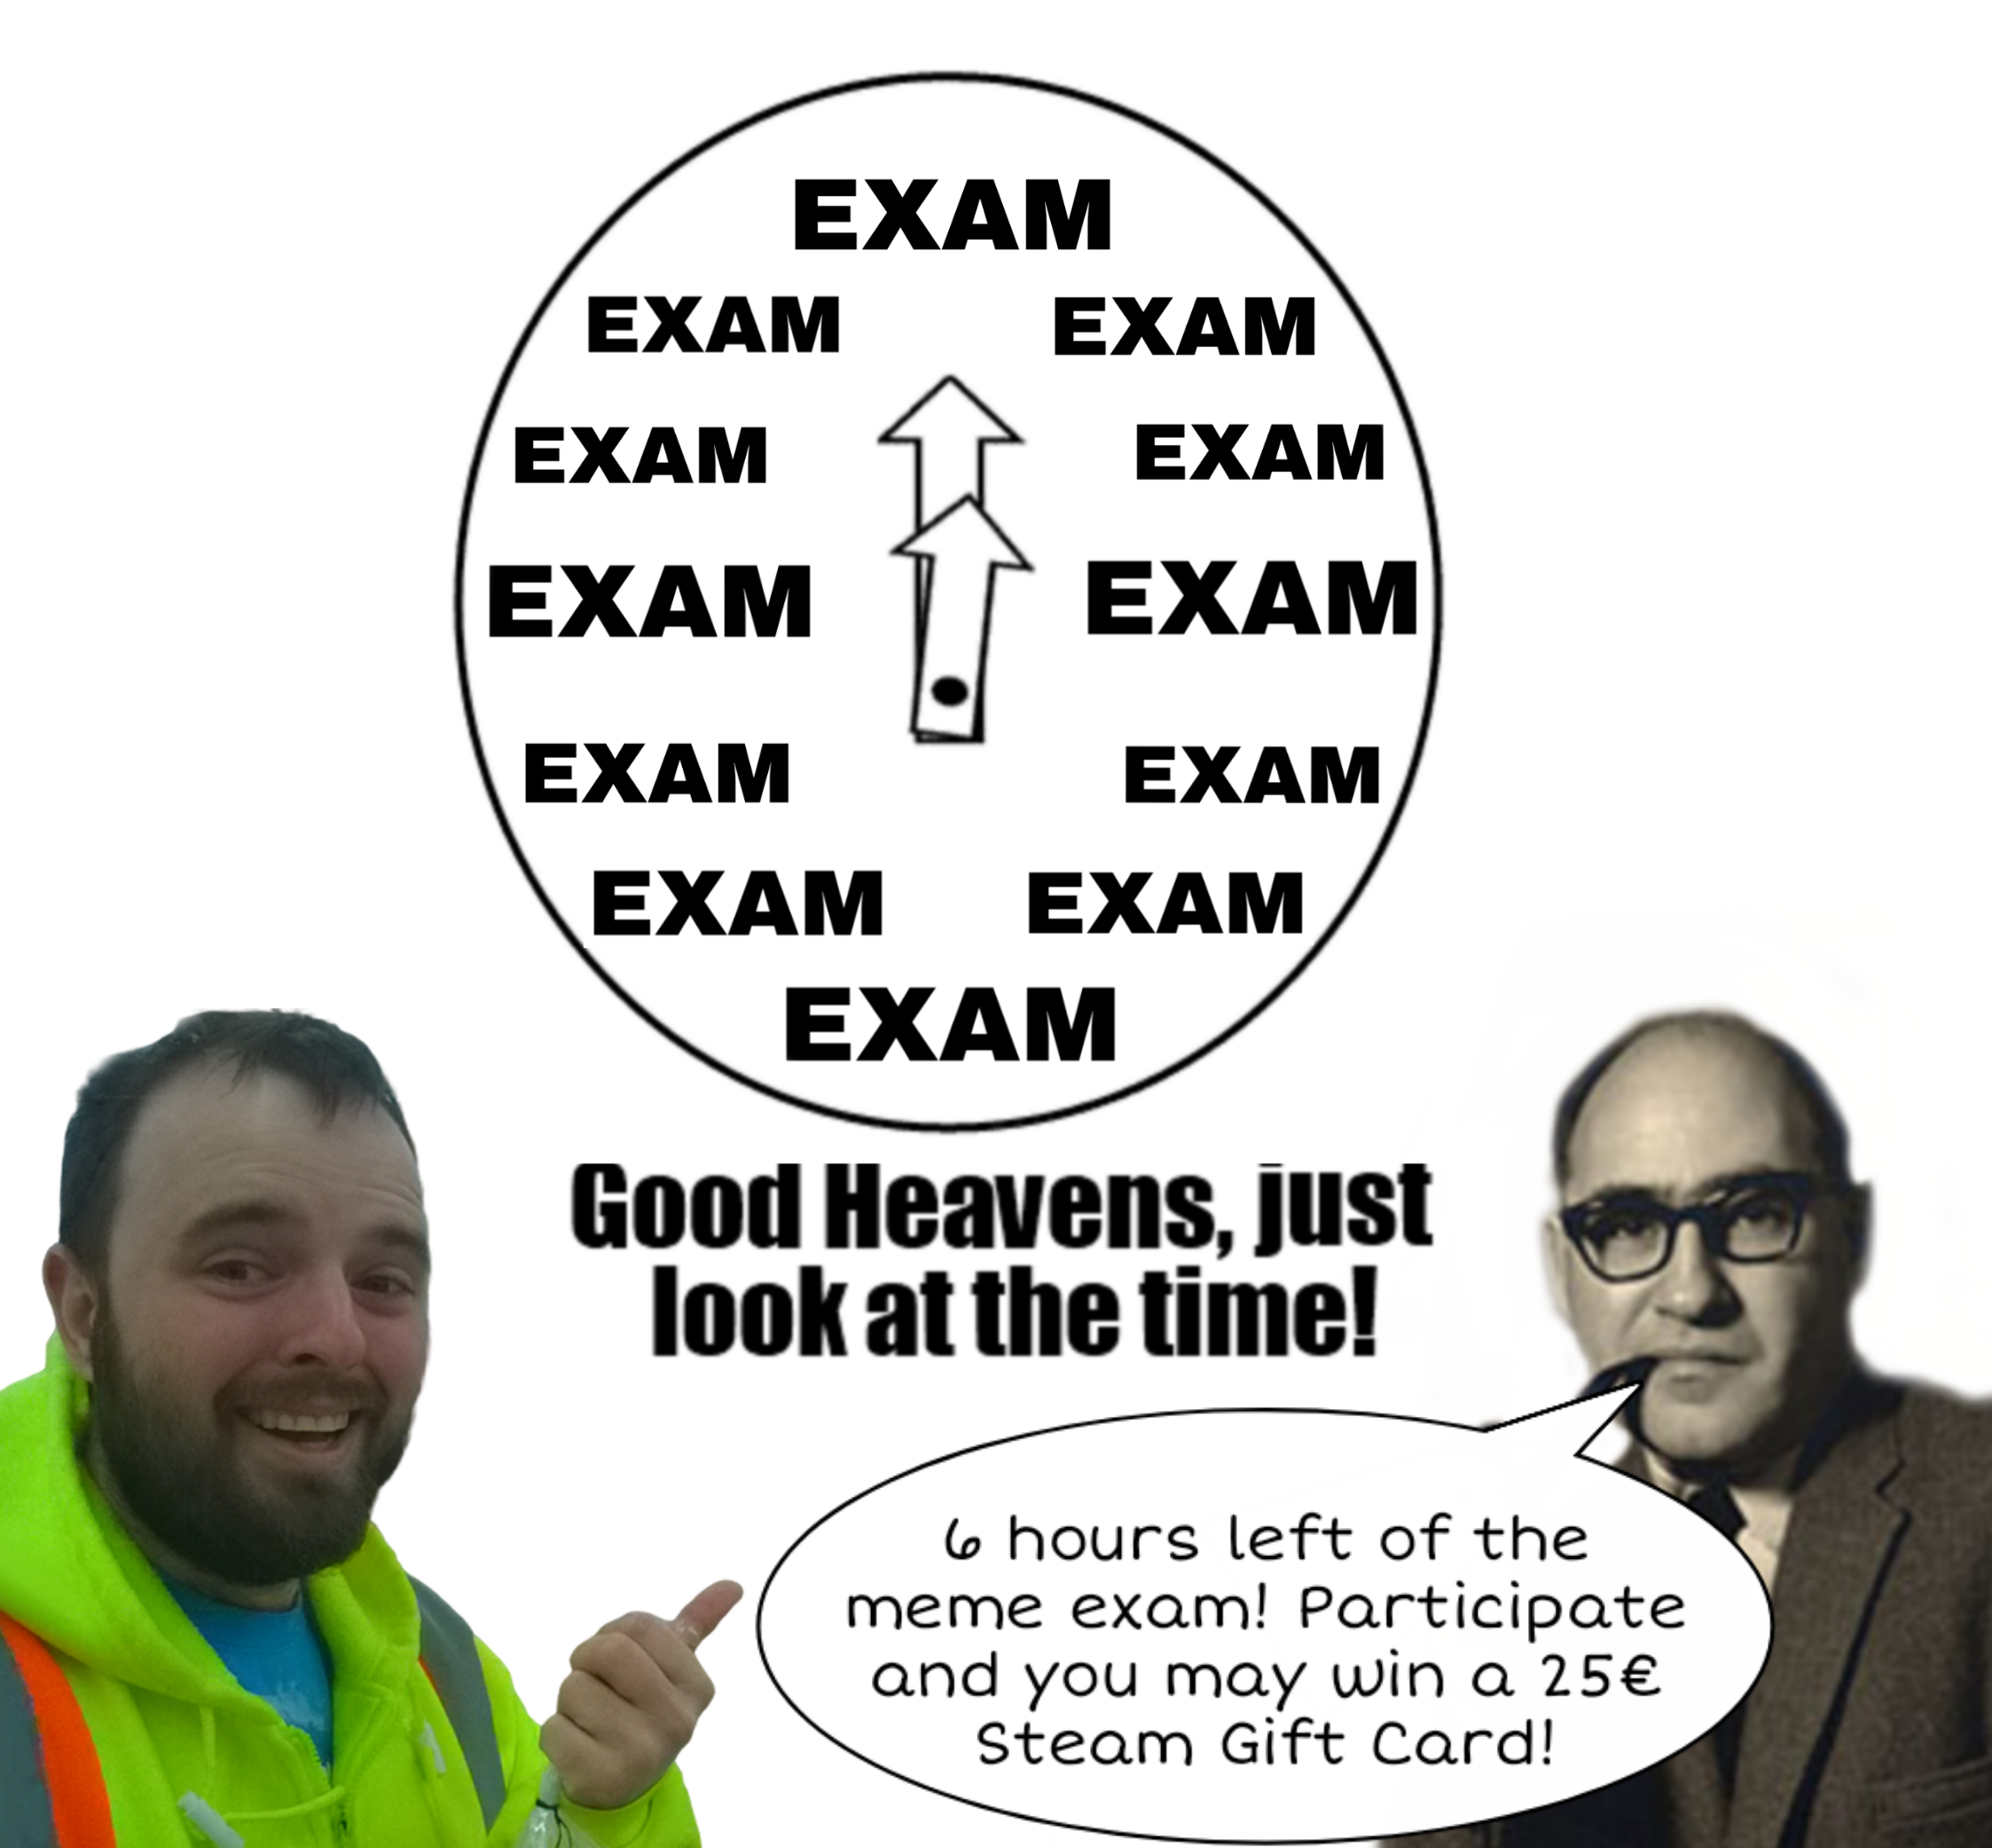 6 hours left on the March meme exam! Take the last chance of doing it. Questions are in the comments